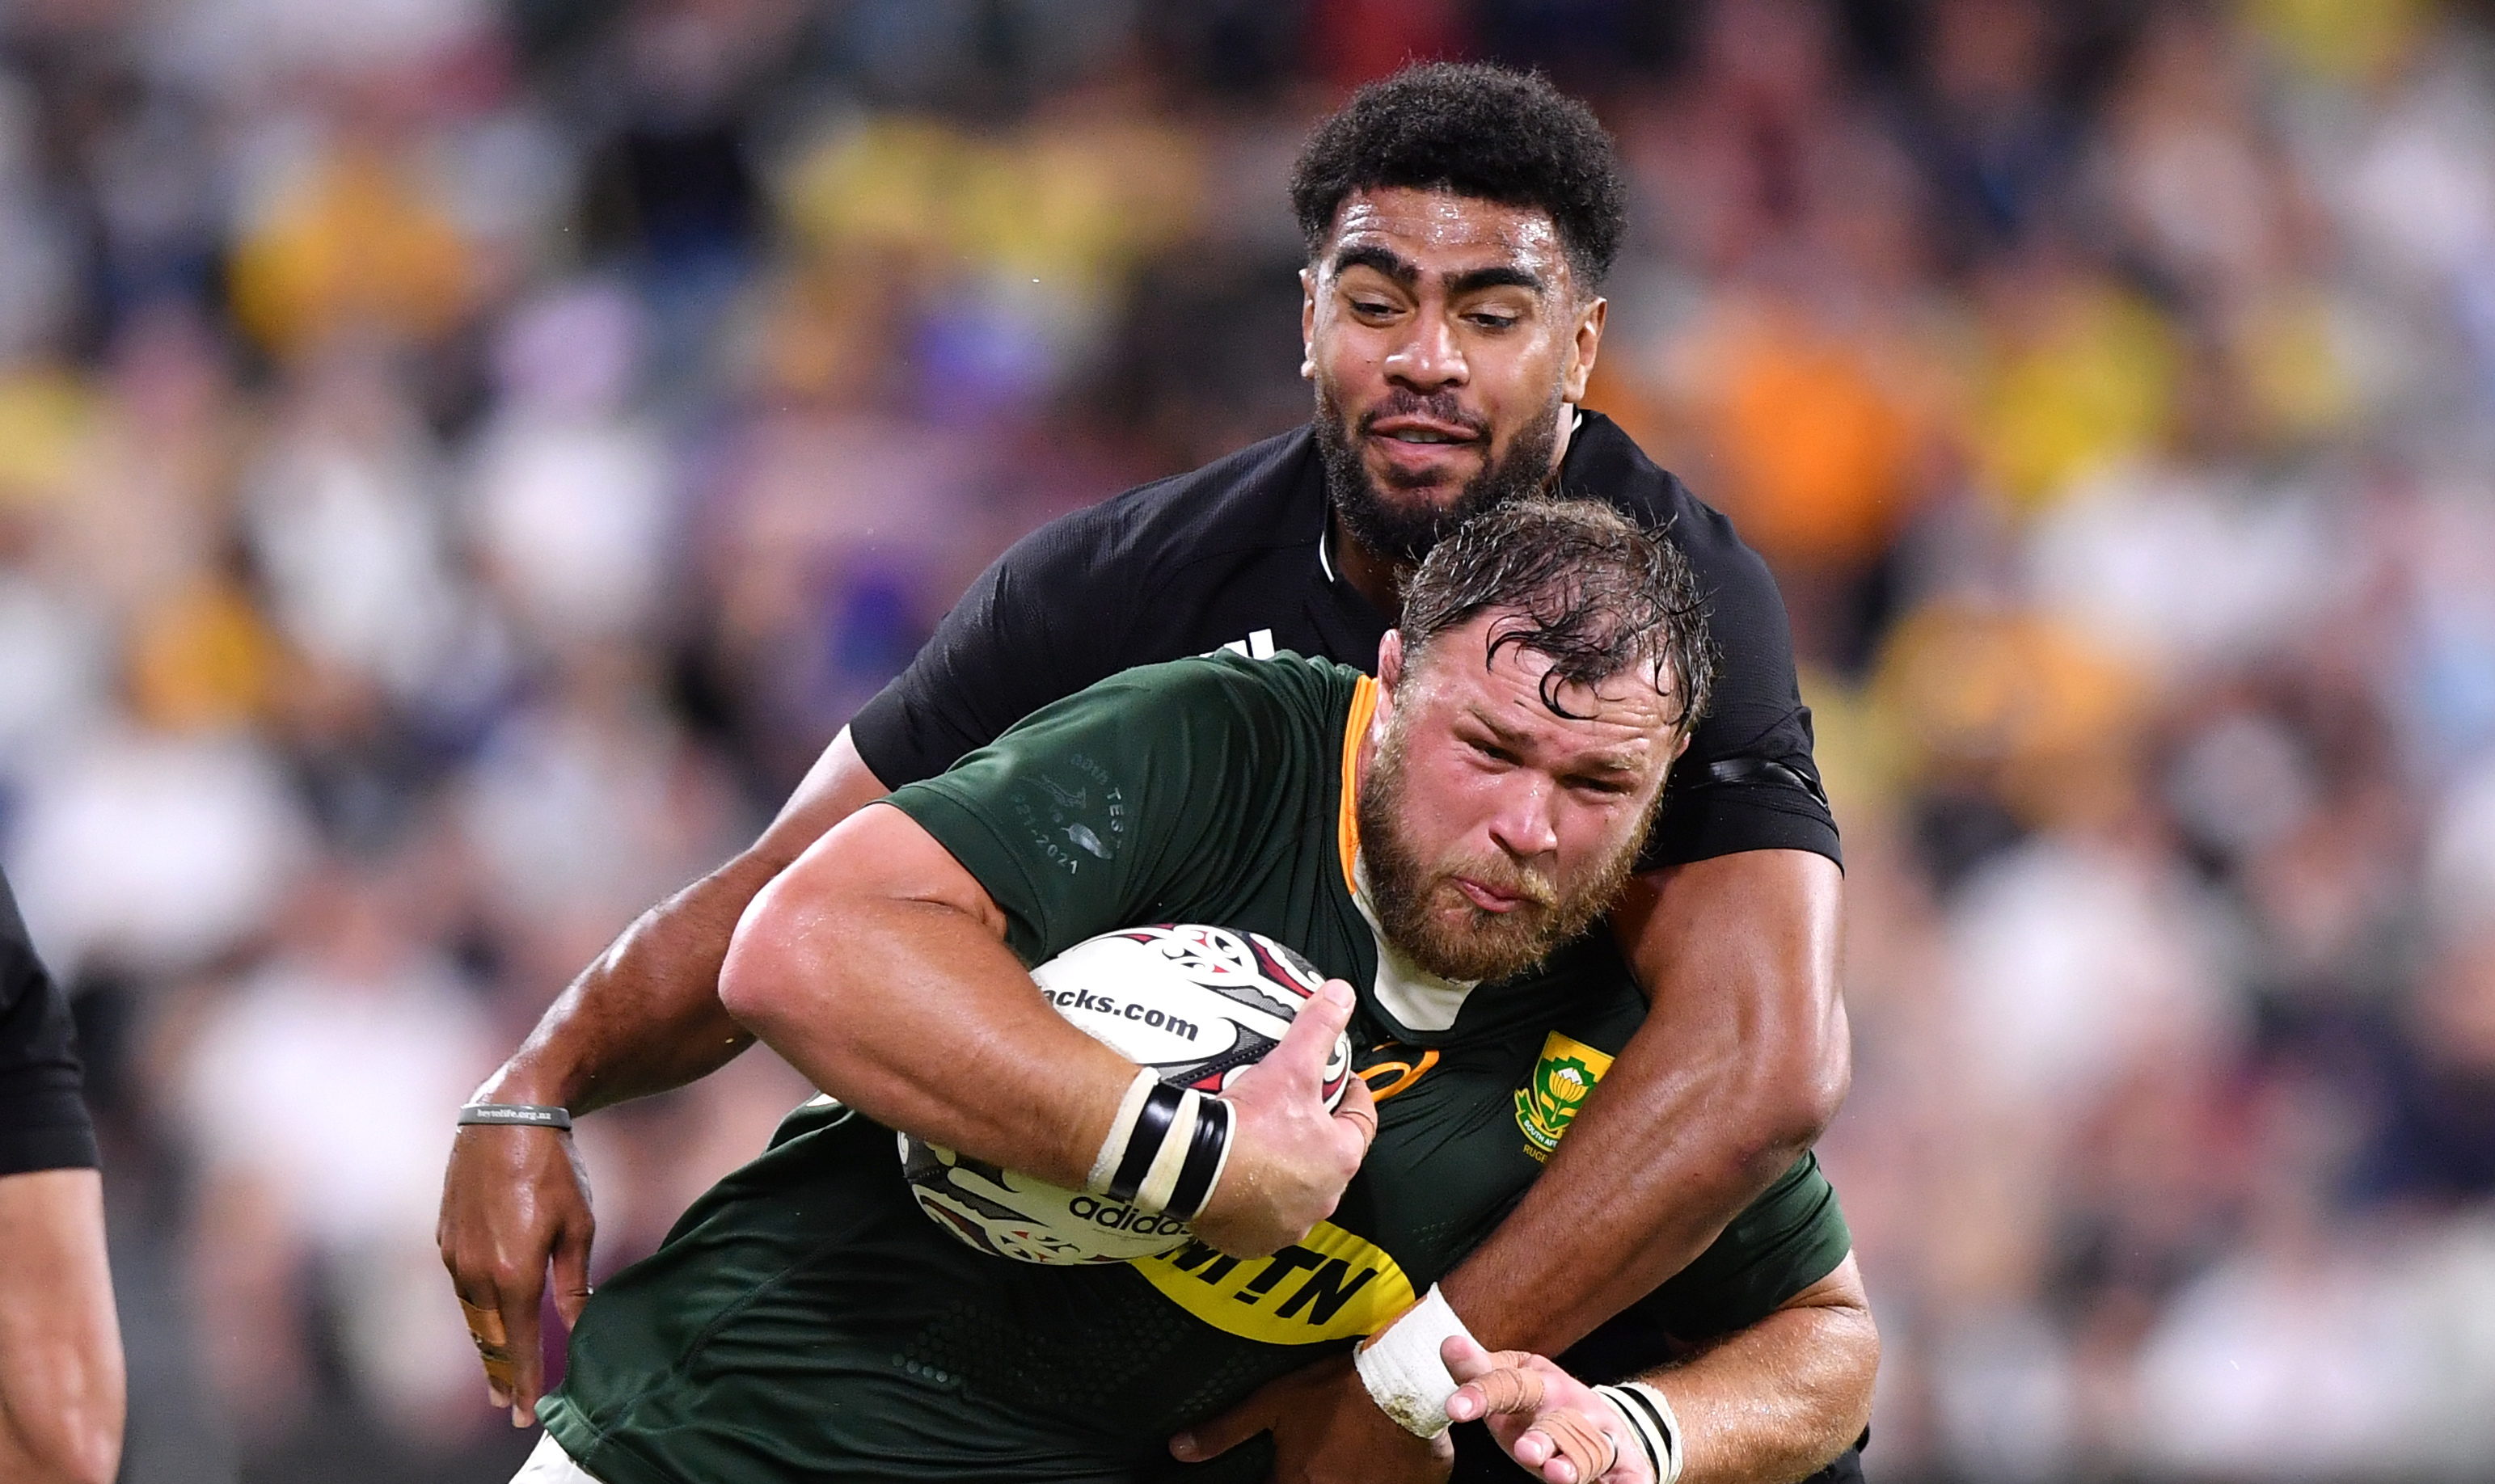 epa09486974 Duane Vermeulen of the Springboks (front) is tackled by Hoskins Sotutu of the All Blacks during the Rugby Championship Round 5 match between New Zealand's All Blacks and South Africa's Springboks at Queensland Country Bank Stadium in Townsville, Queensland, Australia, 25 September 2021. EPA/DARREN ENGLAND AUSTRALIA AND NEW ZEALAND OUT